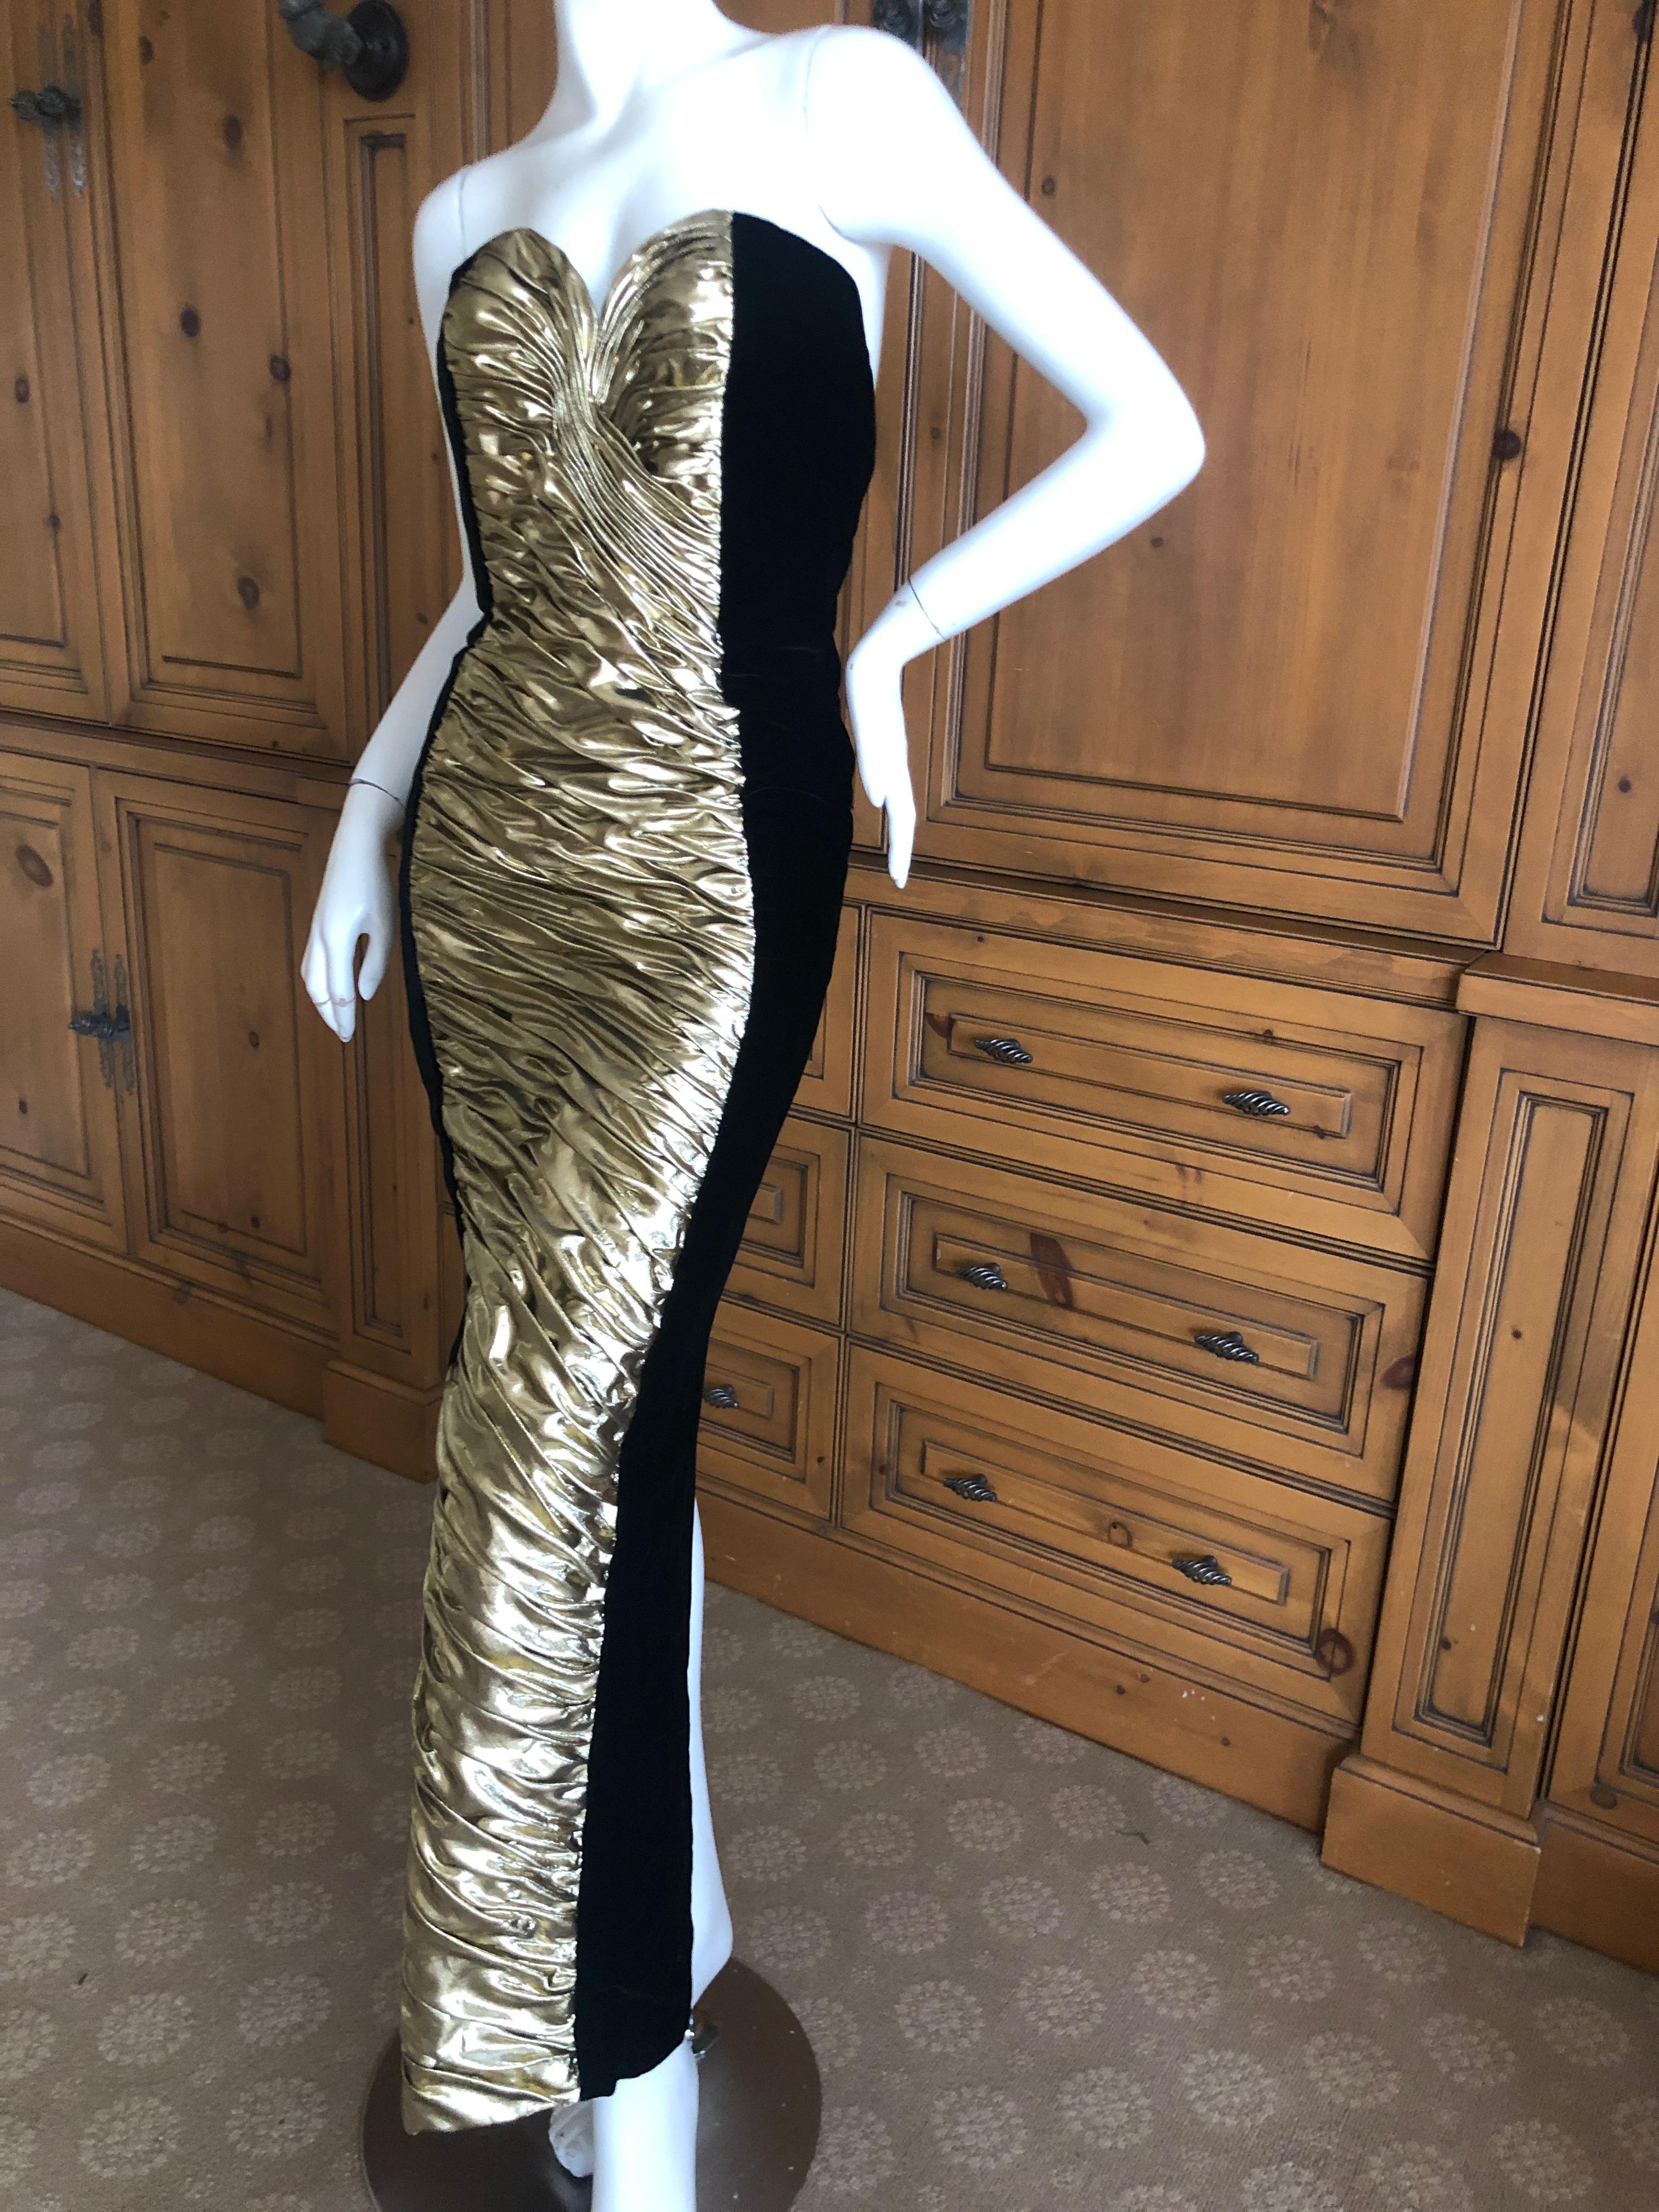 Vicky Tiel Paris Vintage Black Velvet Gold Accented Strapless Siren Dress.
So wonderful, it is slimming as the gold and black contrast makes the illusion of a very slim
silhouette
Size 38
Bust 36